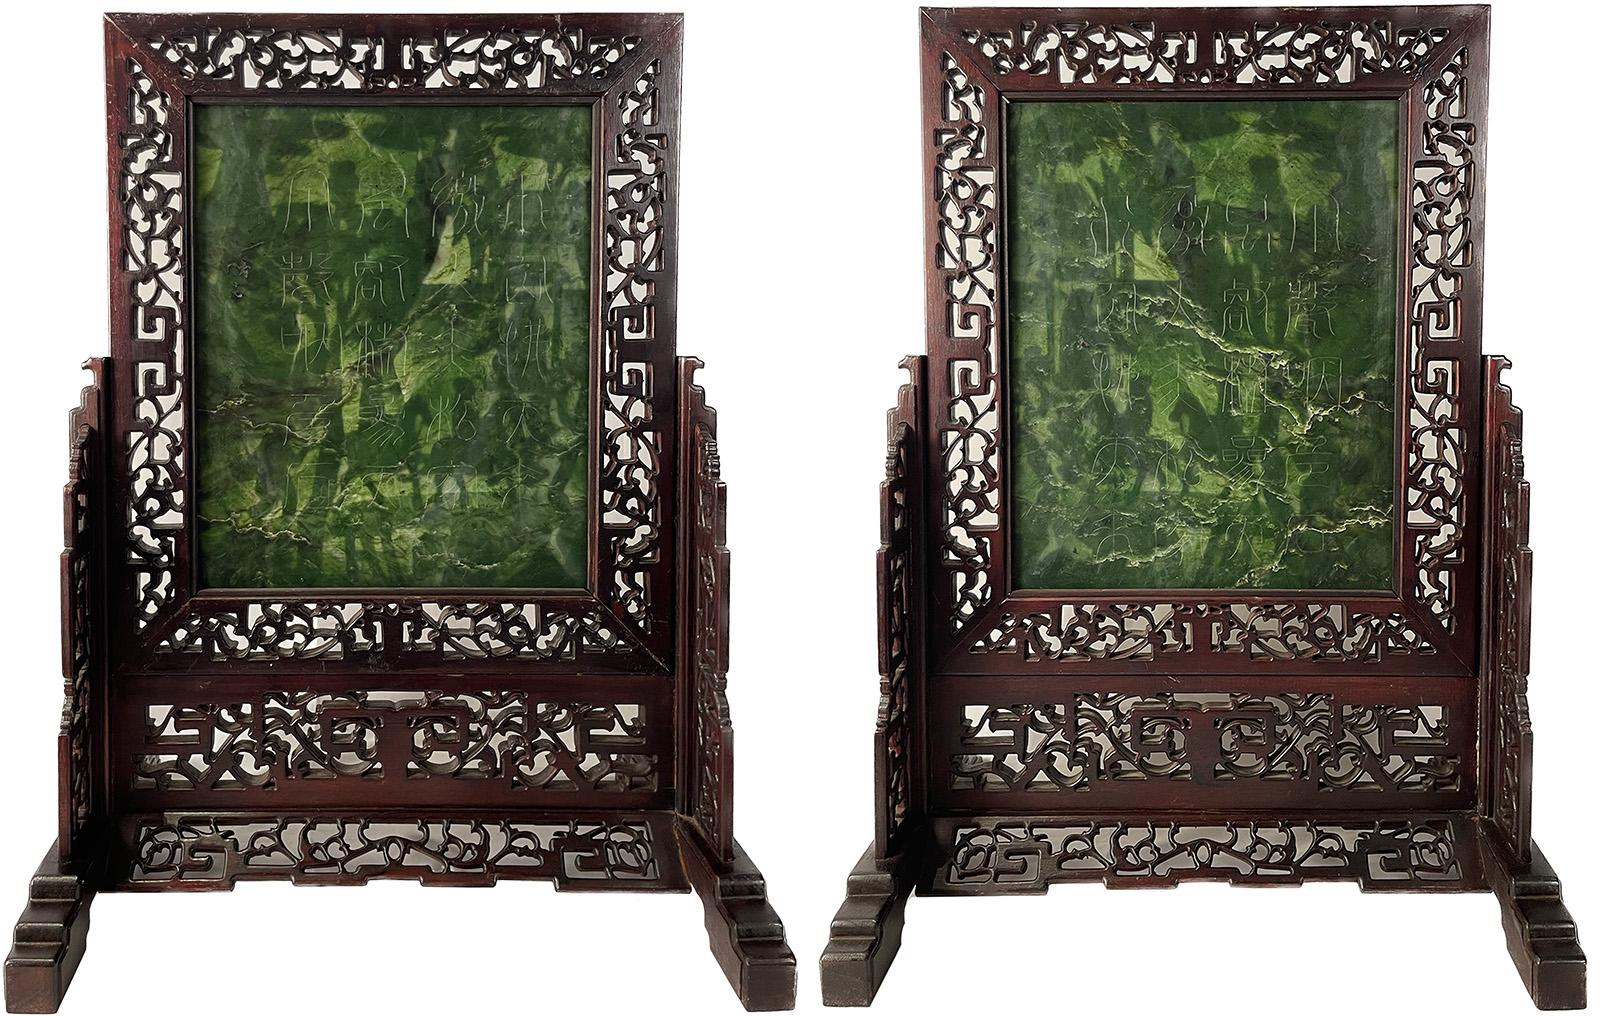 A pair of Chinese spinach jade table screens with carved figures and stands. 

Dimensions of jade screens: 16